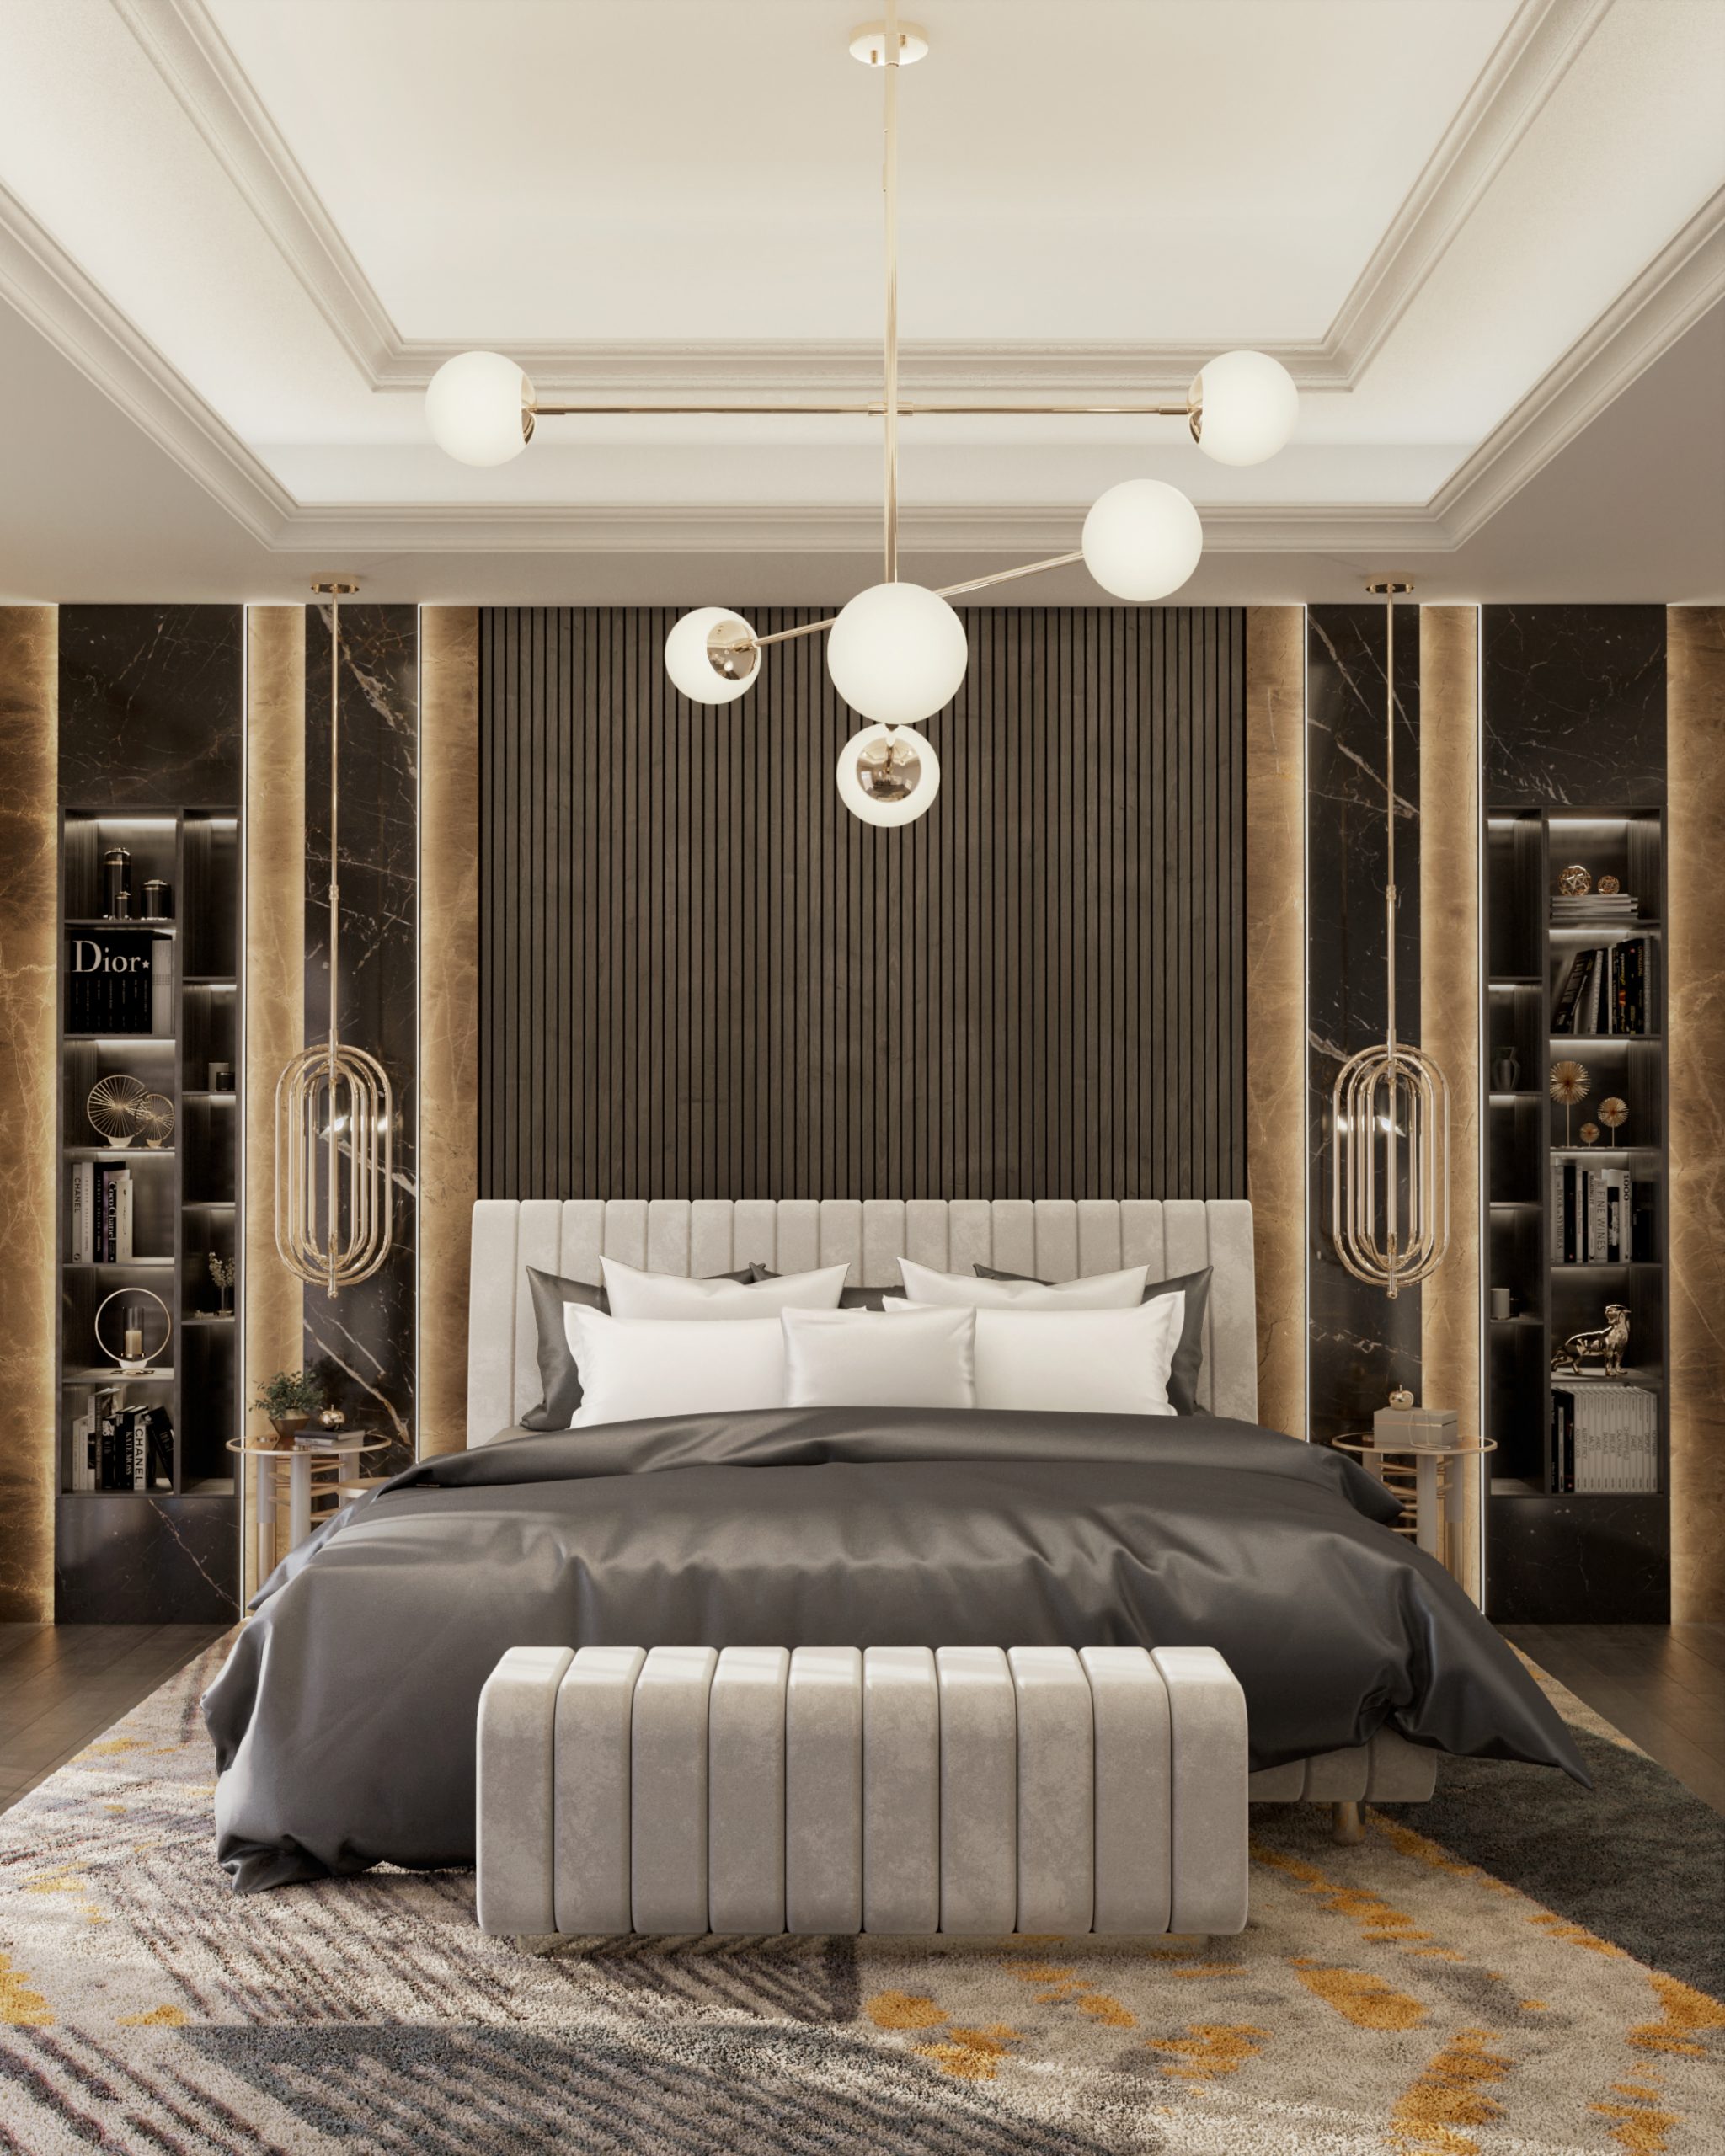 Bedroom Design Inspirations For The Space Of Your Dreams